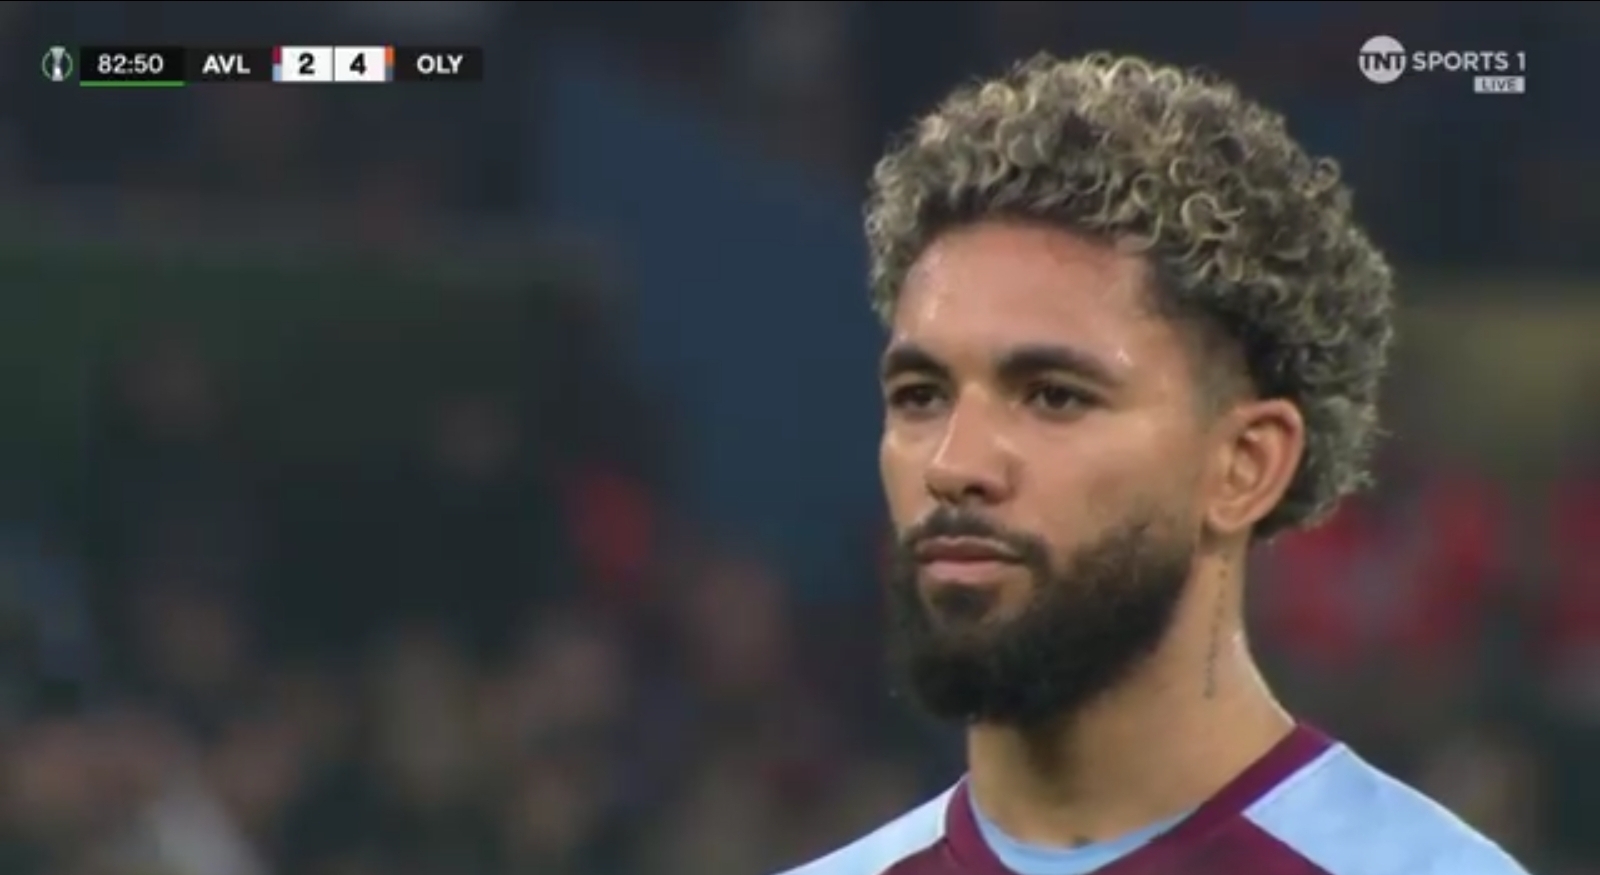 Video: Douglas Luiz misses his penalty to get Aston Villa back into the tie against Olympiacos